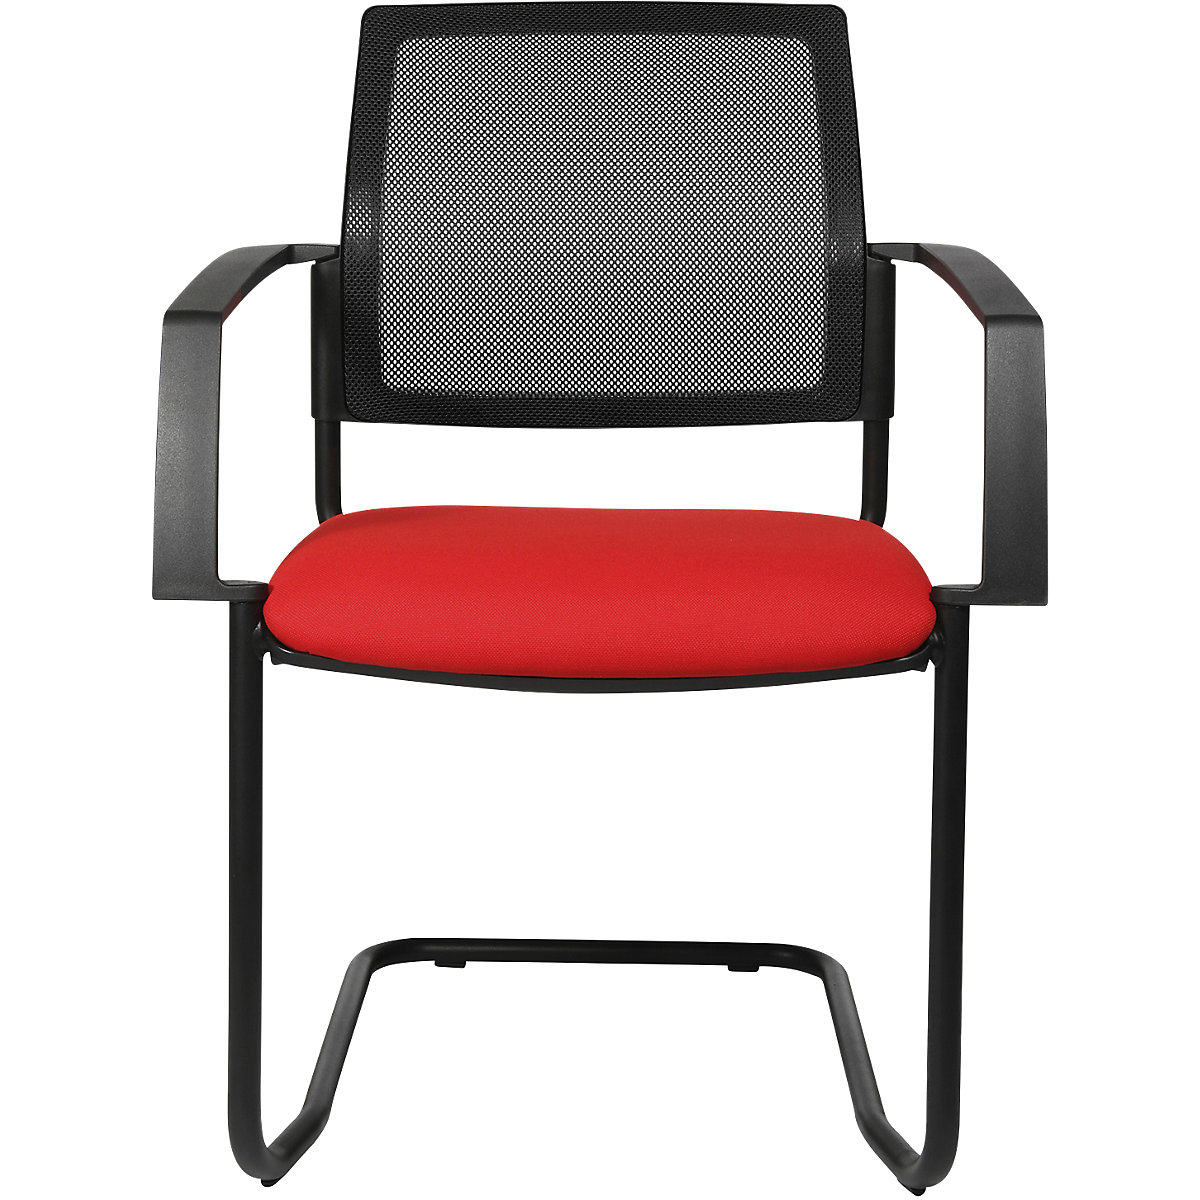 Mesh stacking chair – Topstar, cantilever chair, pack of 2, red seat, black frame-4